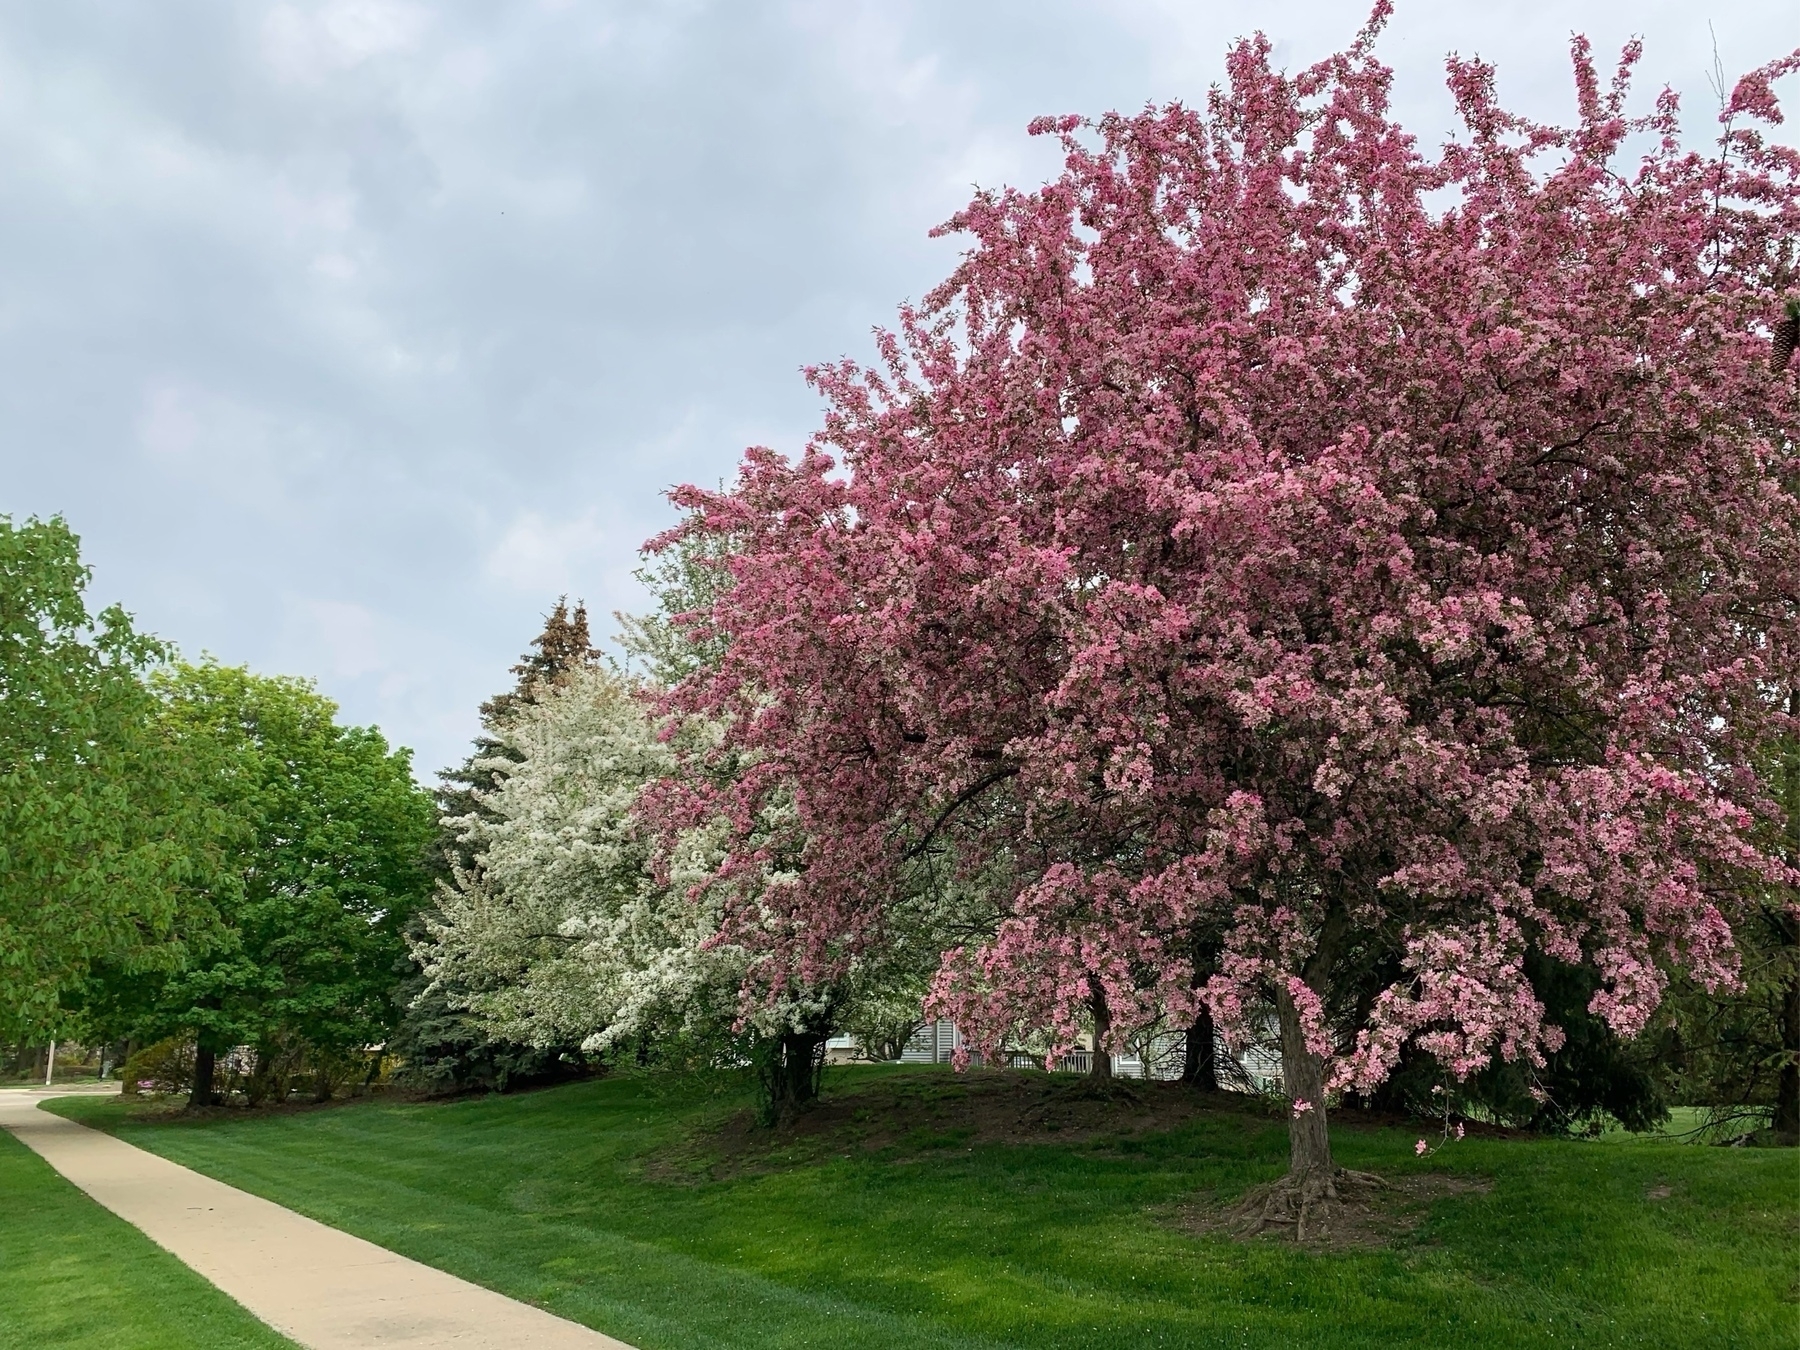 row of large trees blooming with pink and white flowers